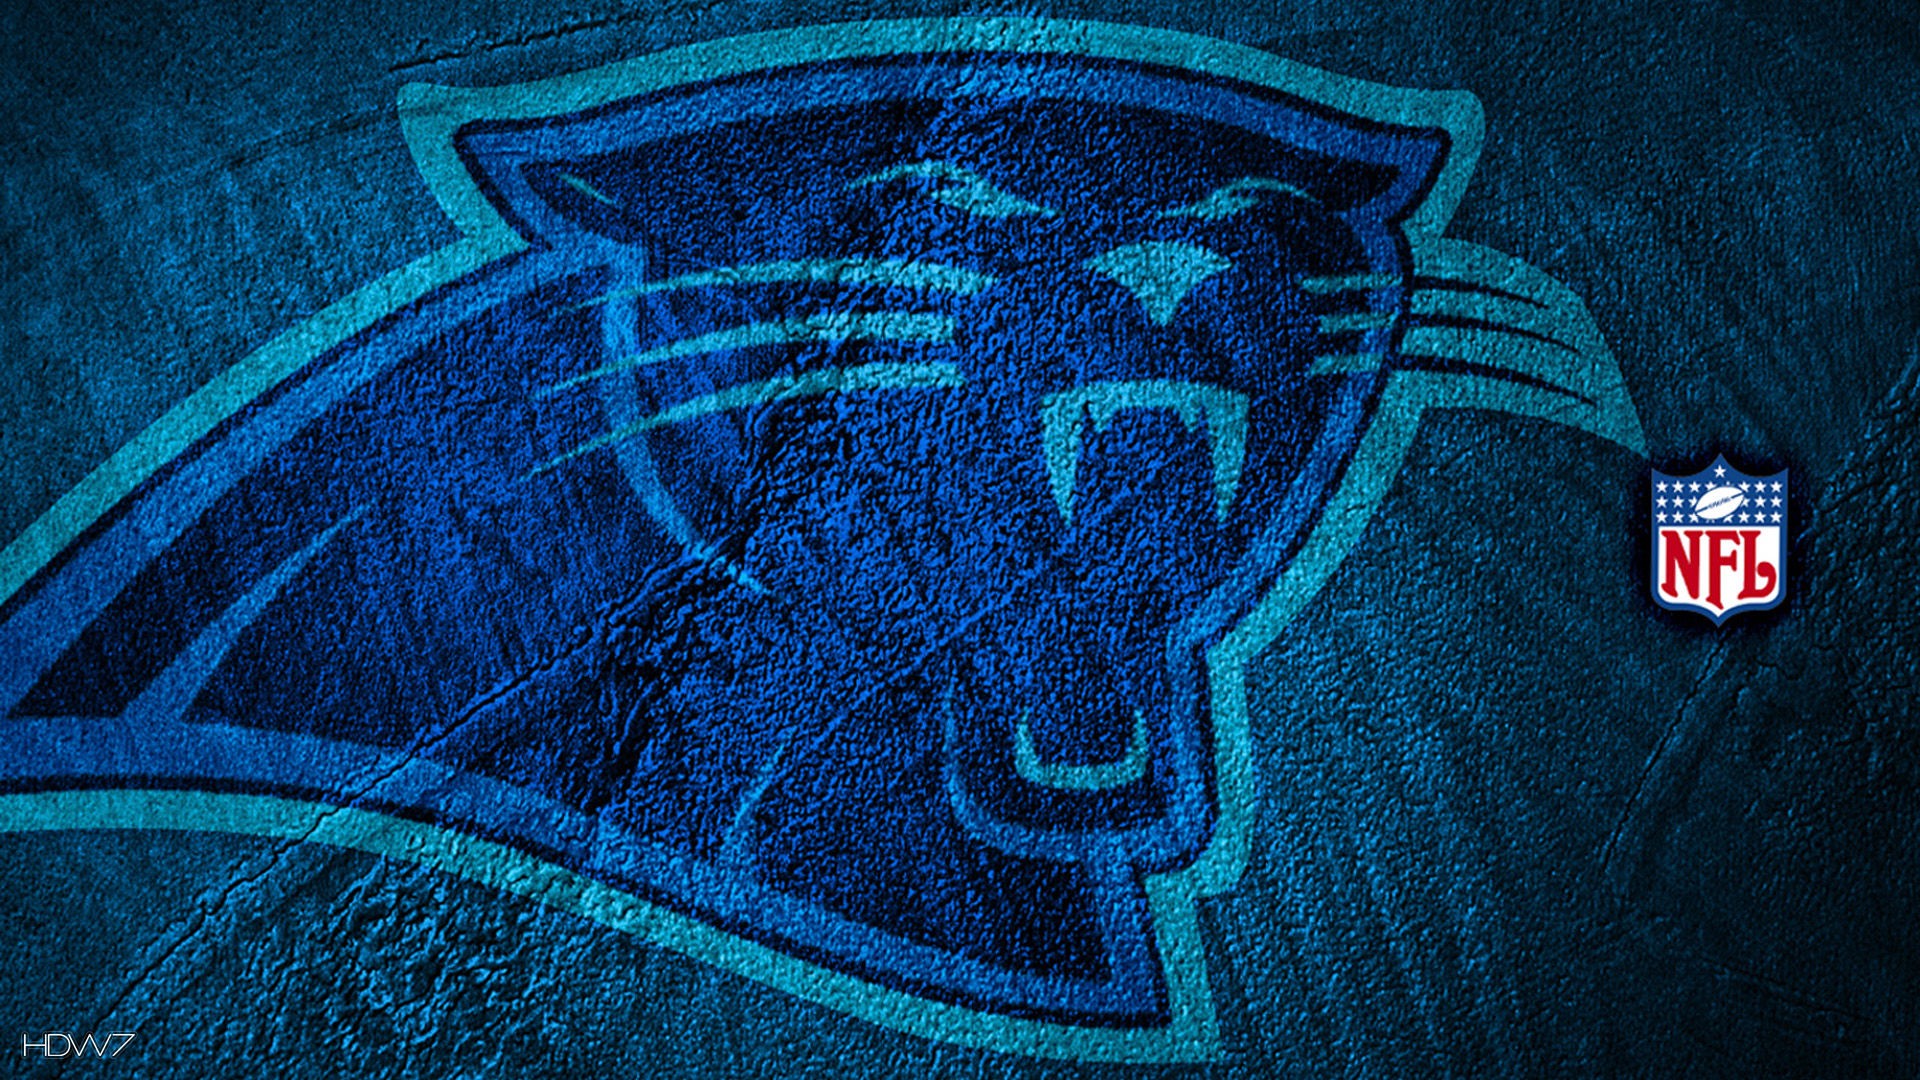 HD Panthers Wallpapers with high-resolution 1920x1080 pixel. You can use this wallpaper for your Mac or Windows Desktop Background, iPhone, Android or Tablet and another Smartphone device